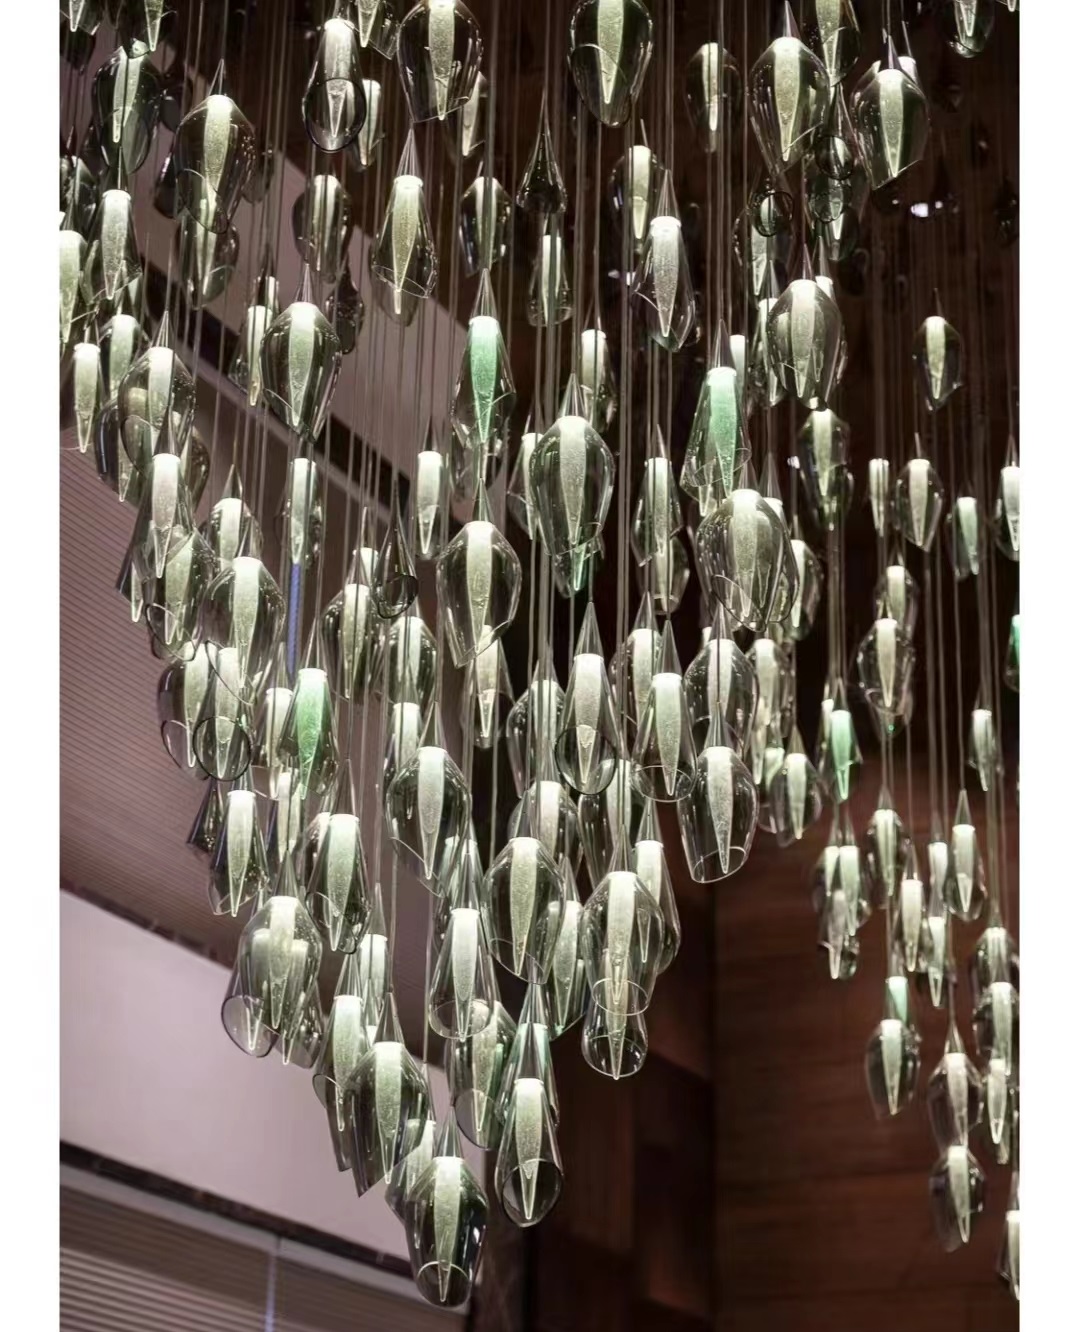 How to choose a large non-standard chandelier in Canada?